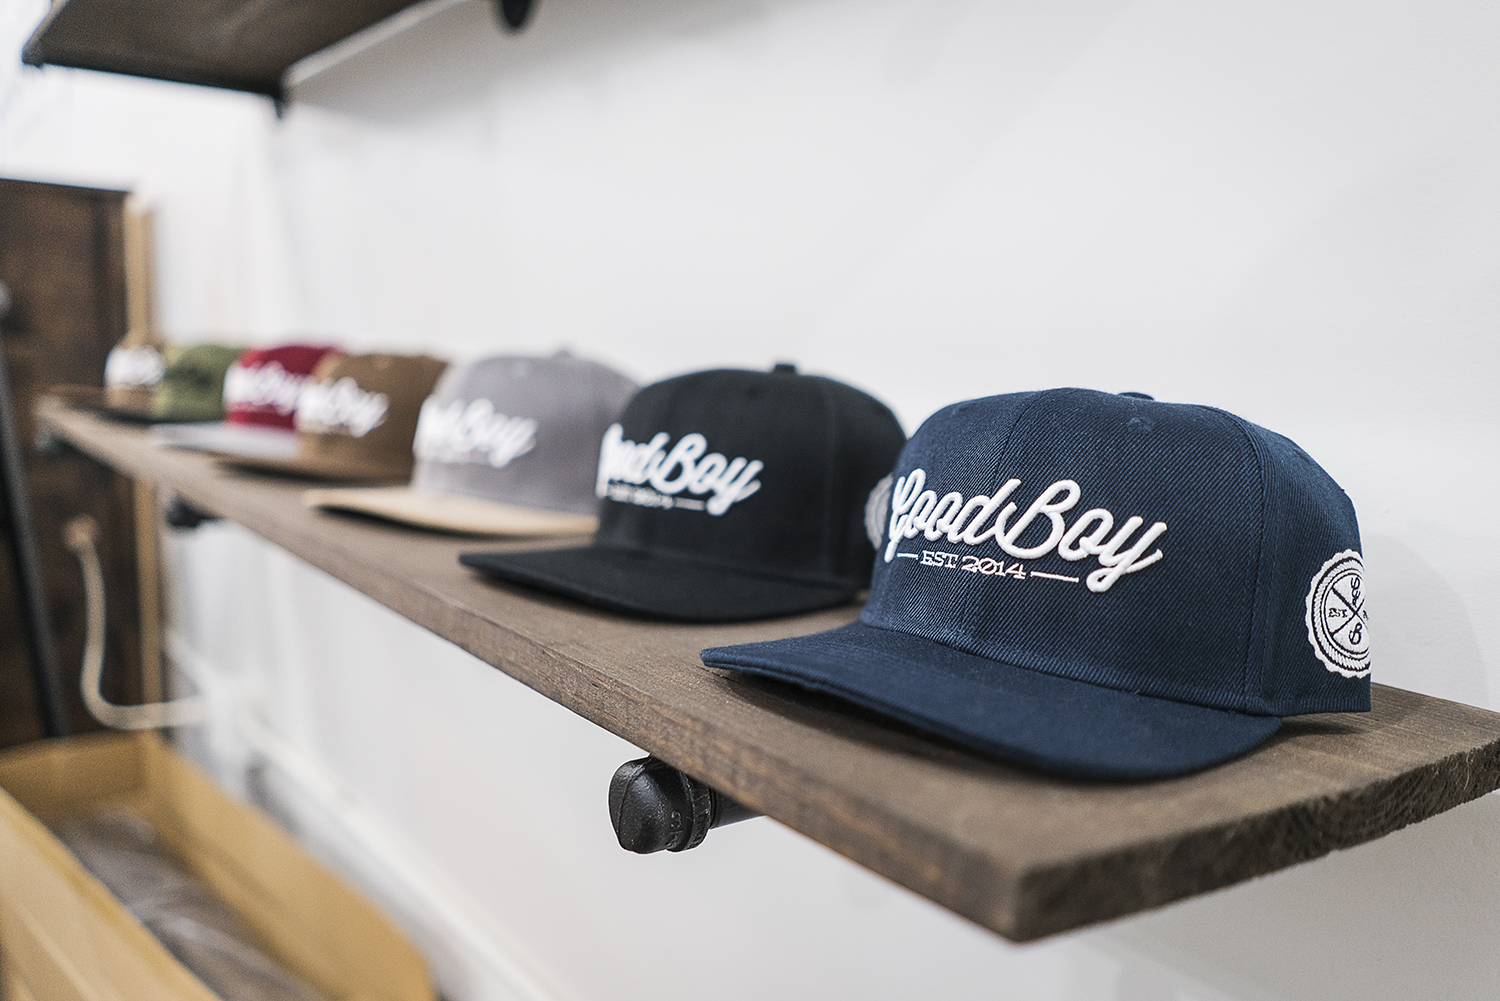 Shelves are lined with brand new merchandise in the new GoodBoy Clothing showroom in downtown Flint. The crew at GoodBoy has been preparing tirelessly for the upcoming grand opening event on Friday, November 17, 2017.